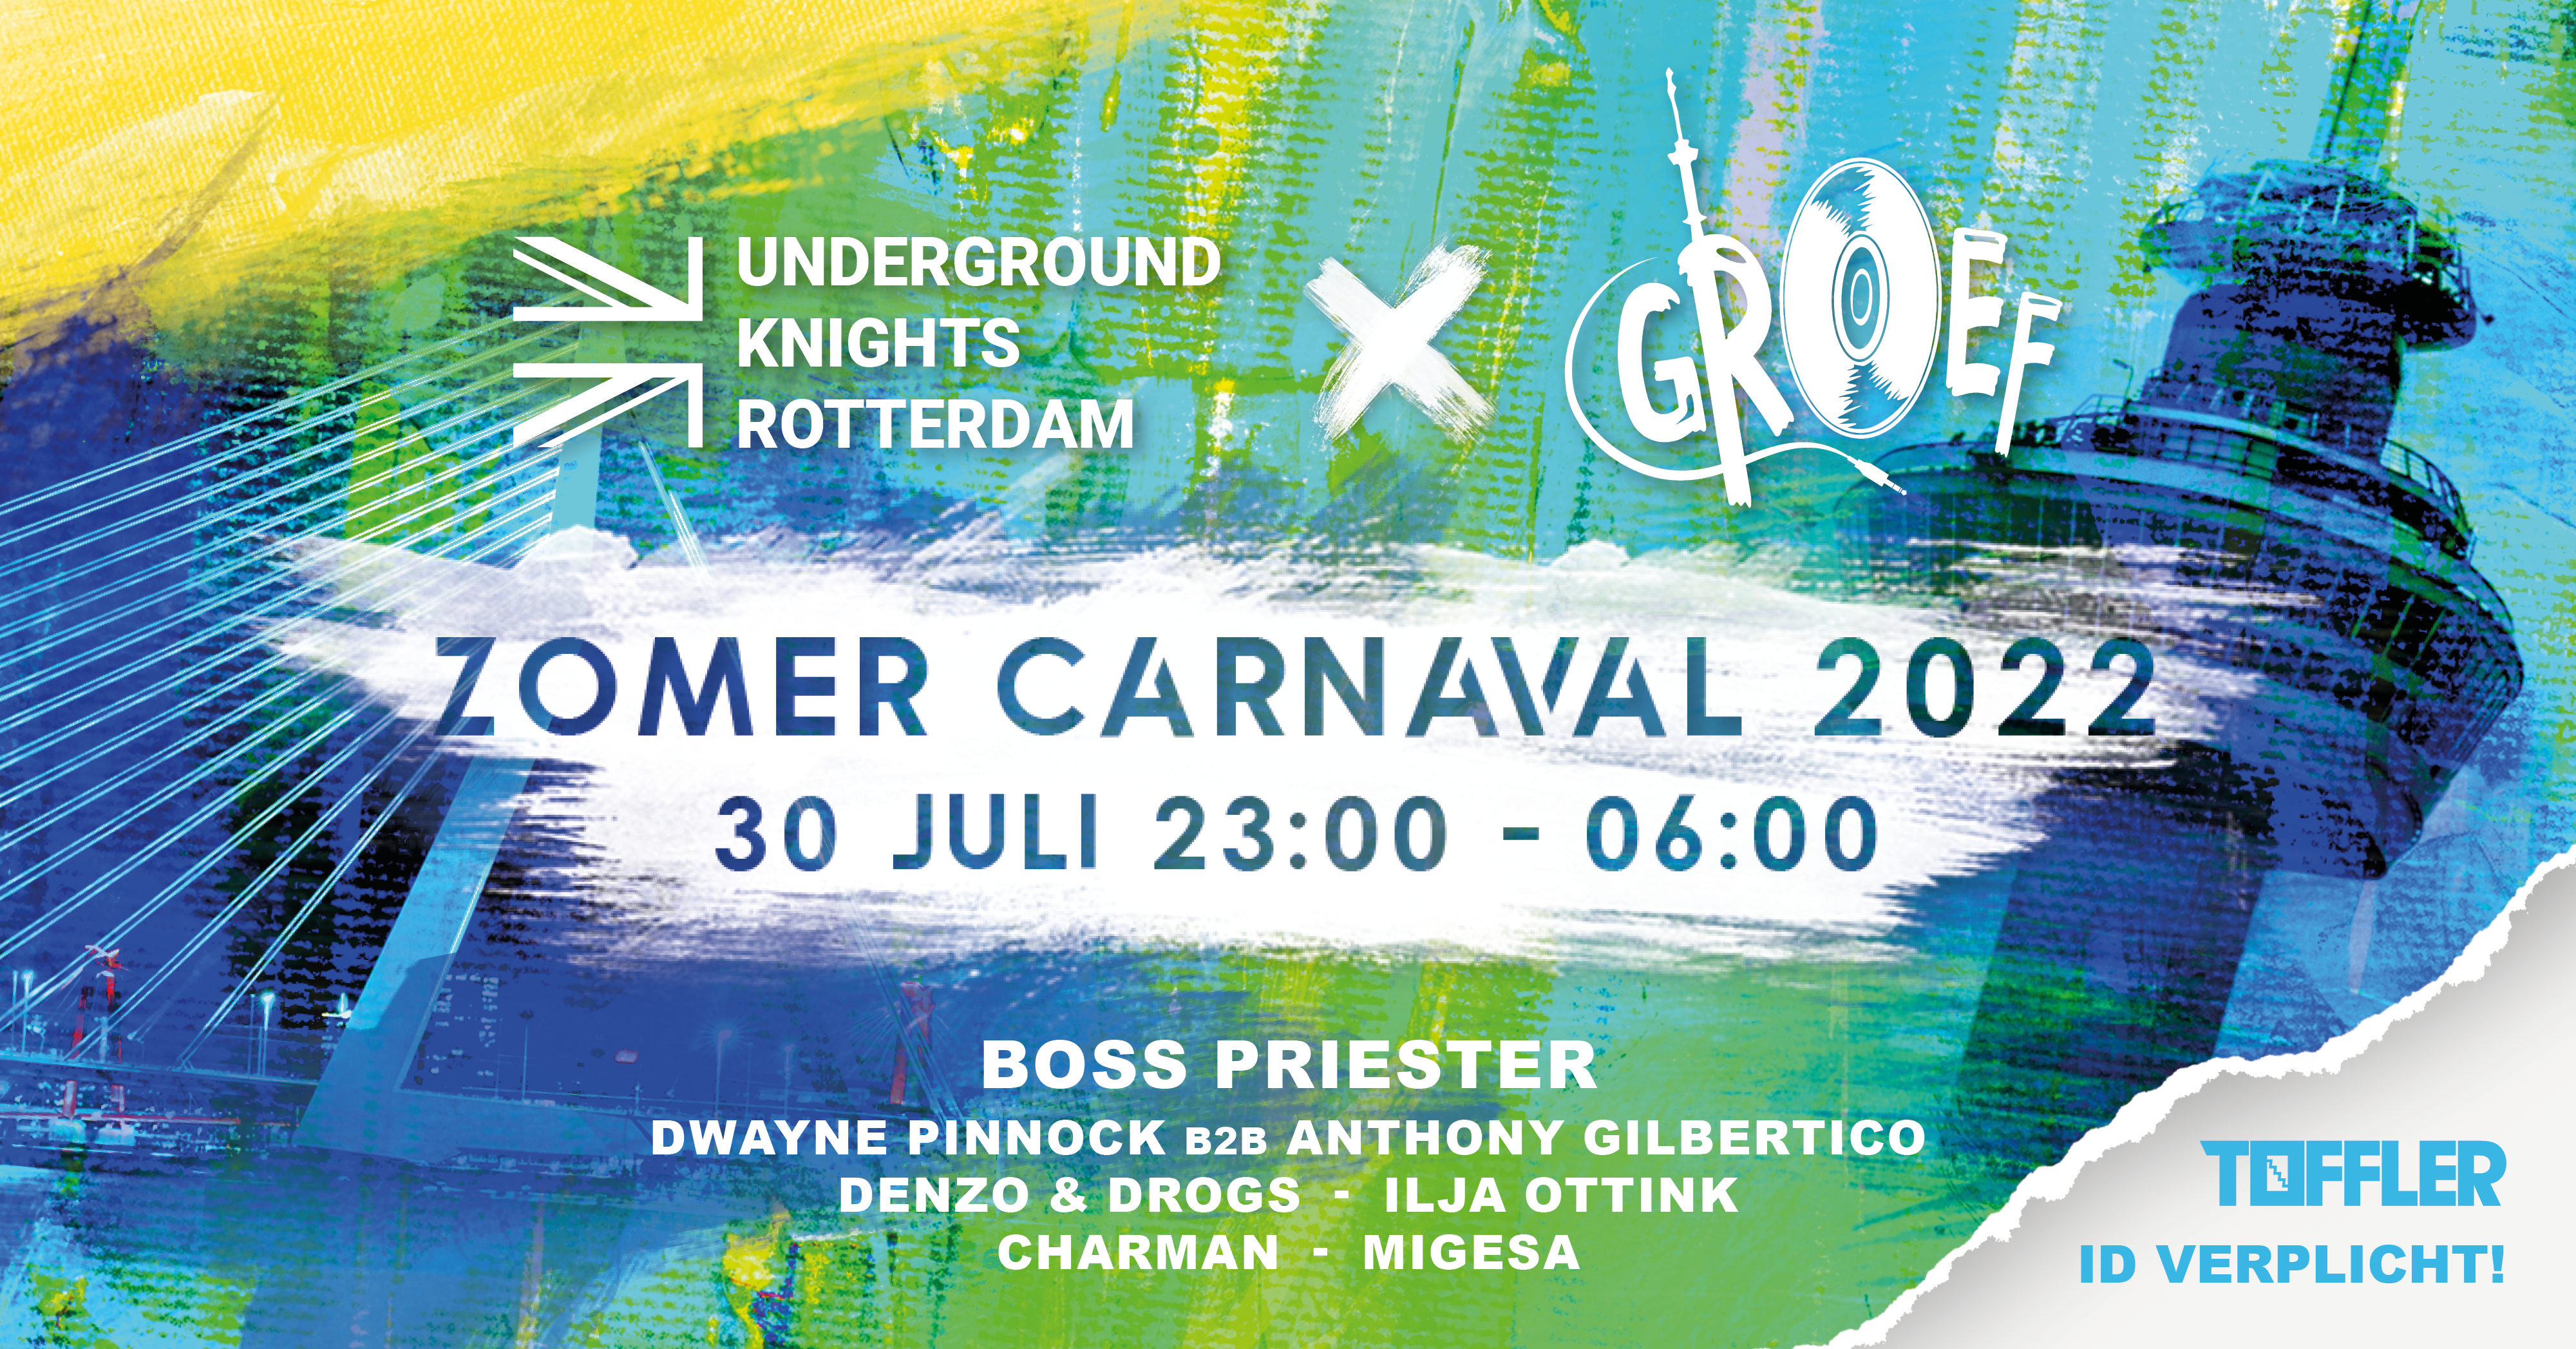 UKR x Groef with Boss Priester - Zomer Carnaval 2022 - Página frontal